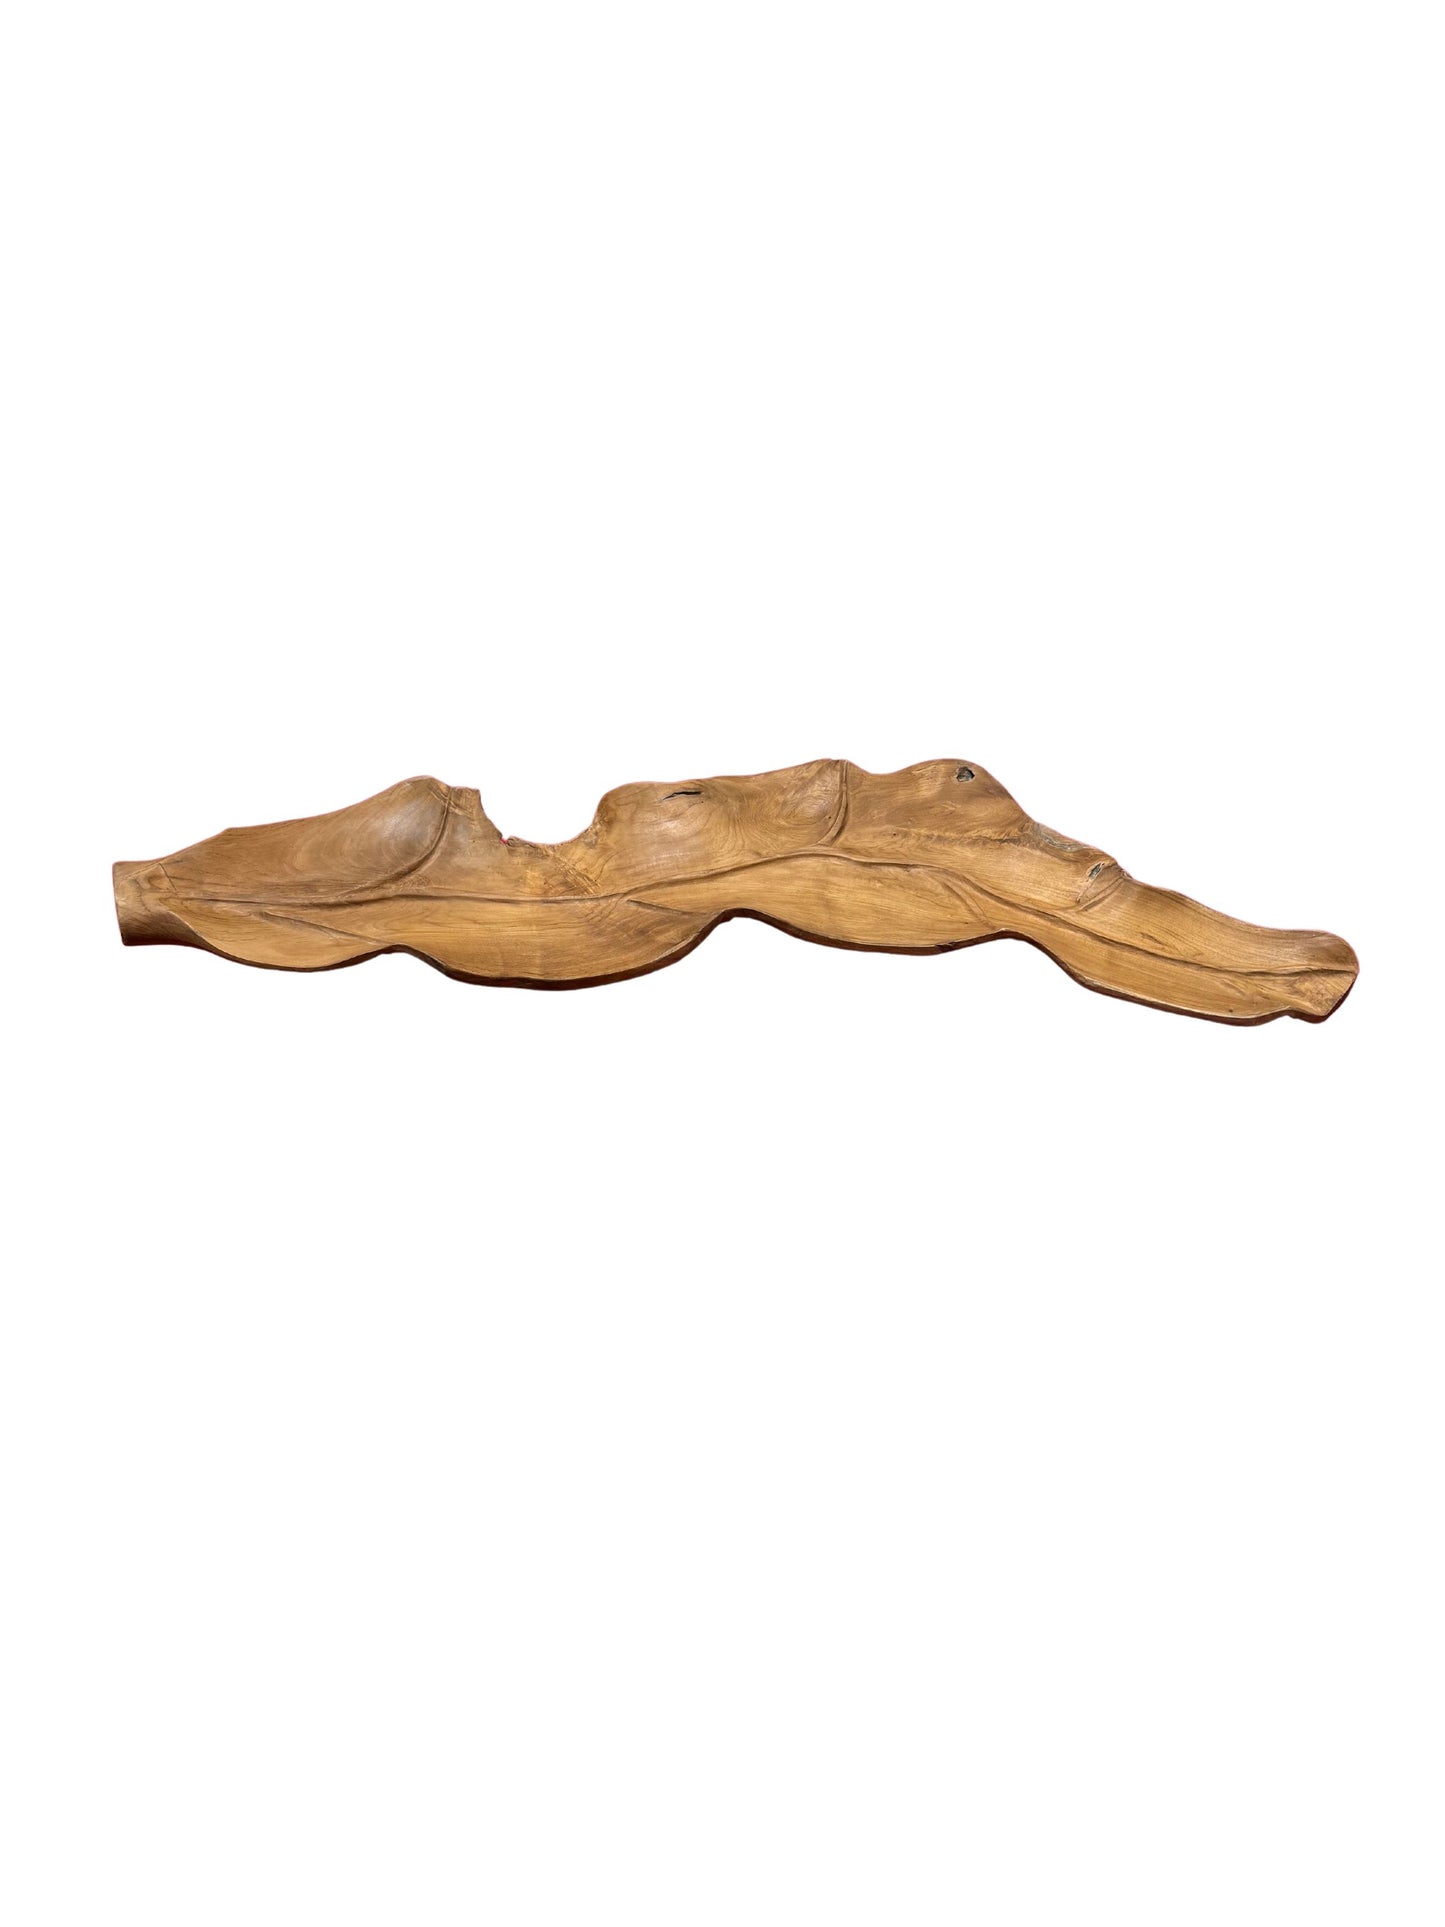 Eclectic Home Accent Teak Leaf Plate 1228M Wooden Decor Furniture